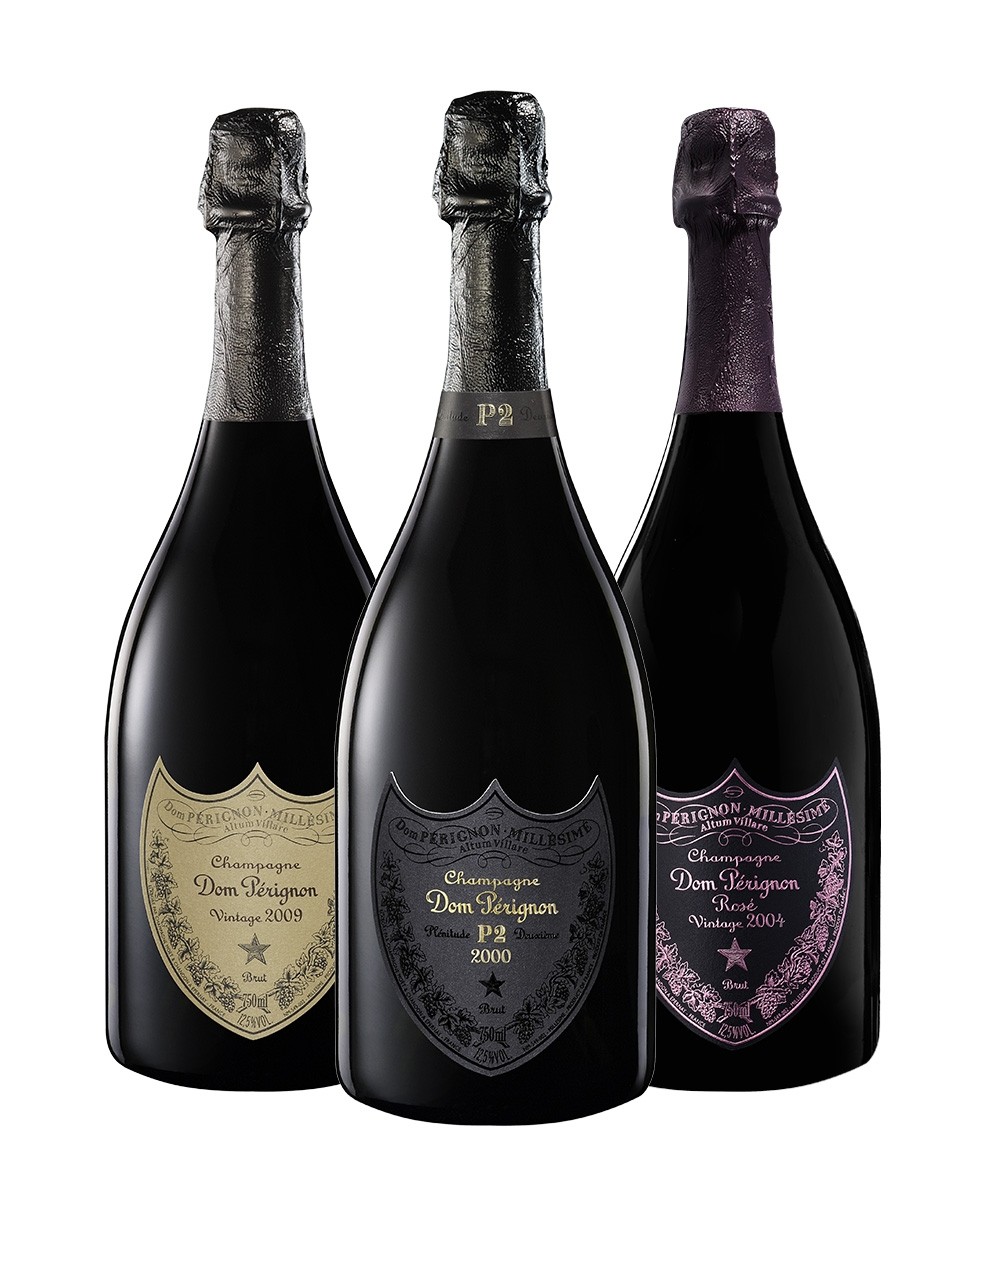 Dom Pérignon Champagne Collection (3 bottles) Buy Online or Send as a